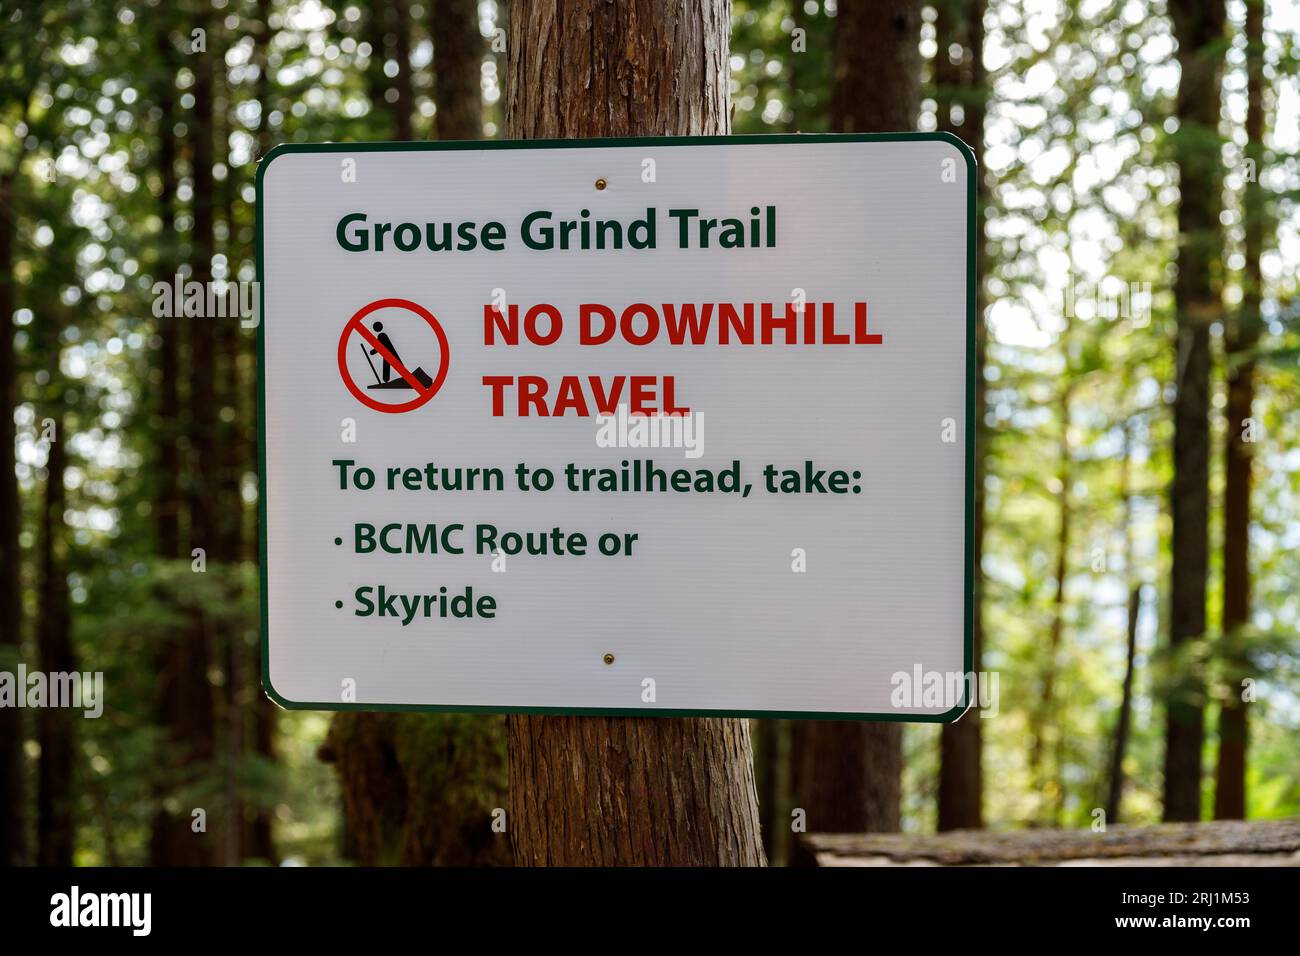 View of a warning sign along the Grouse Grind Trail indicating that downhill travel is prohibited Stock Photo